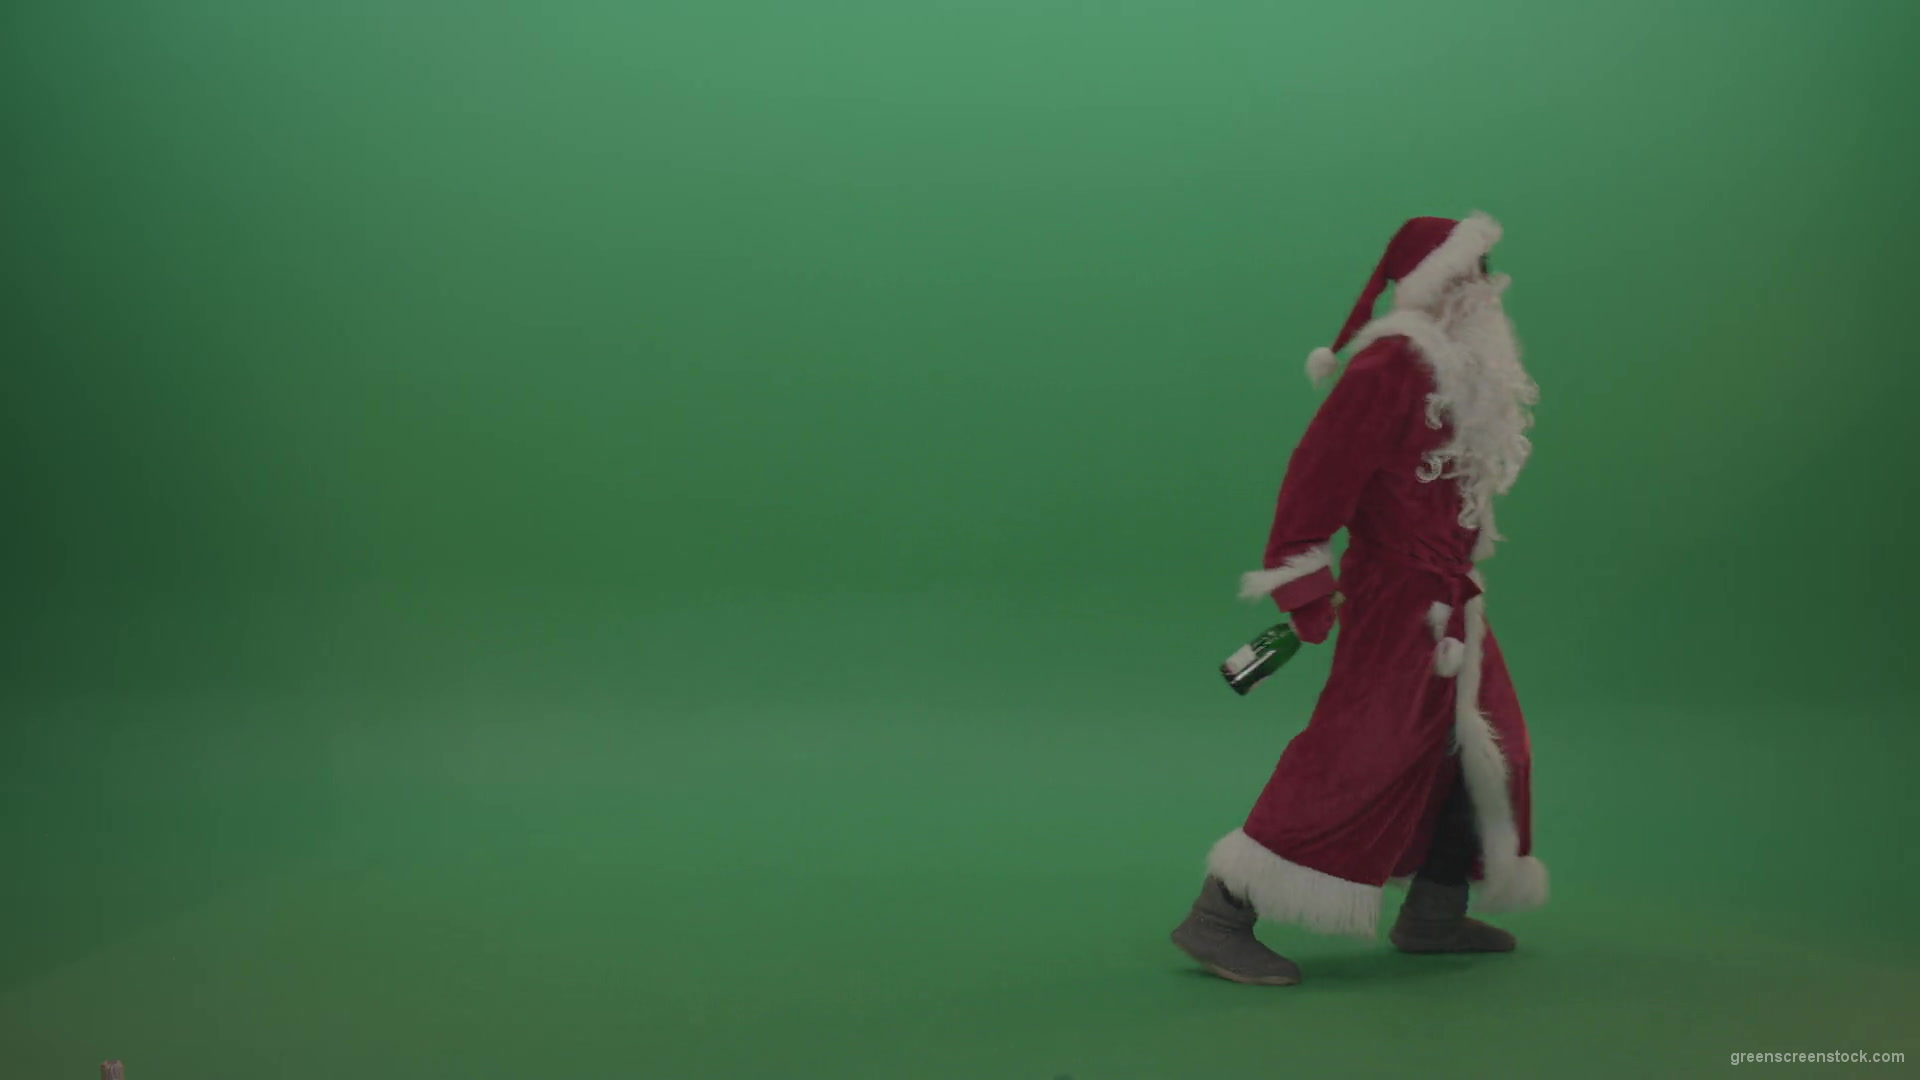 Drunk-santa-in-black-glasses-with-a-bottle-of-wine-staggers-across-the-green-screen-background-1920_009 Green Screen Stock